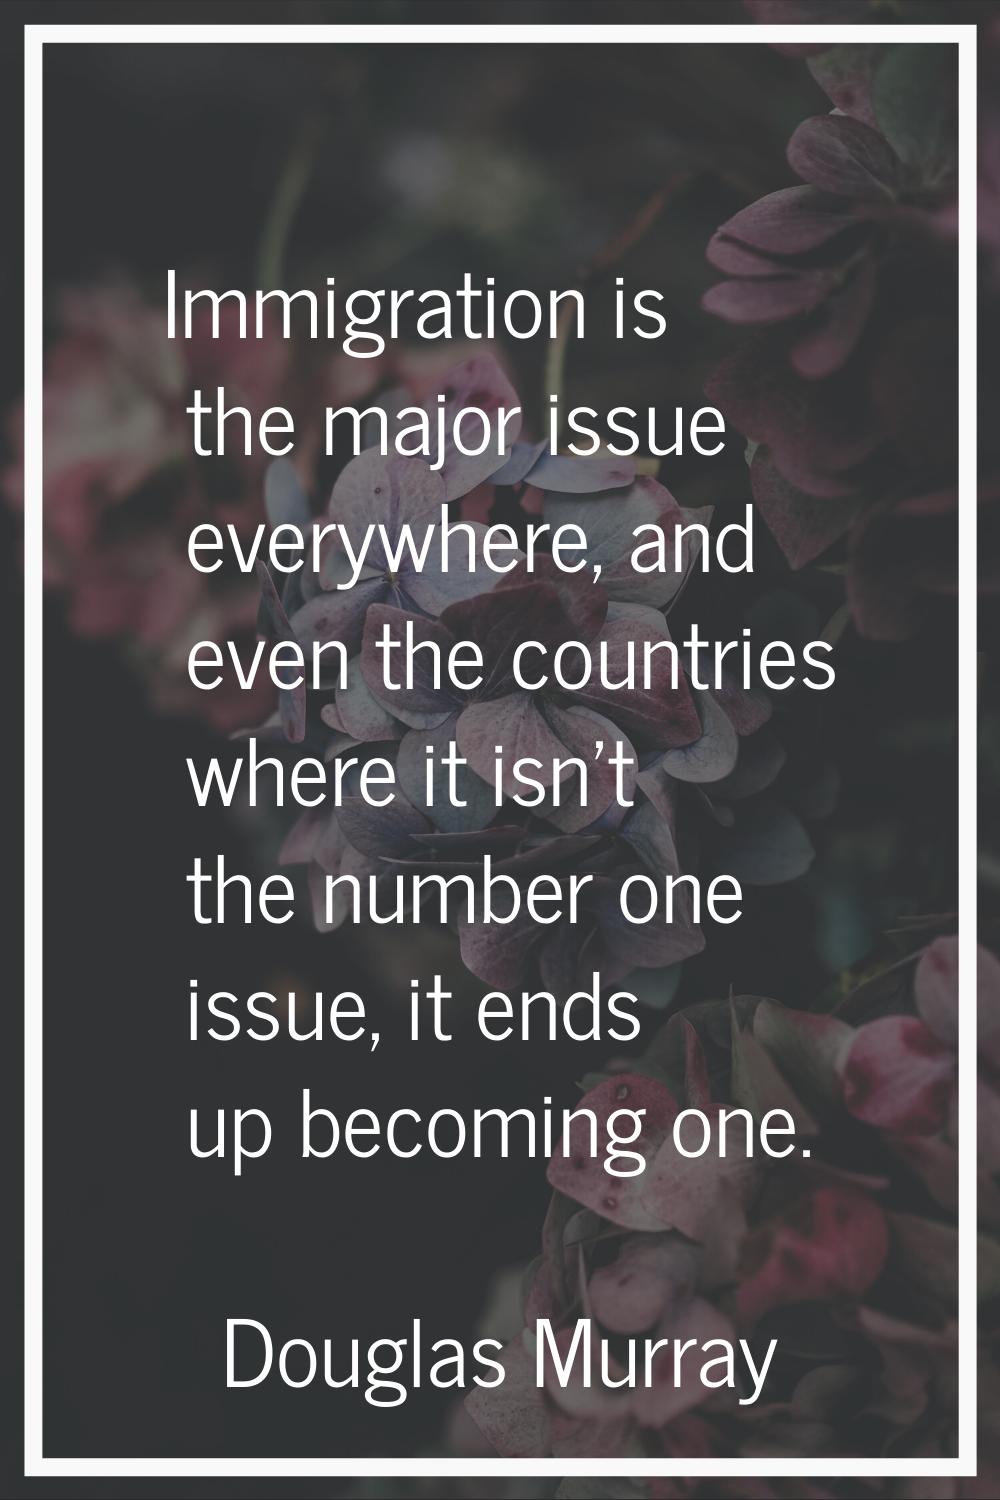 Immigration is the major issue everywhere, and even the countries where it isn't the number one iss